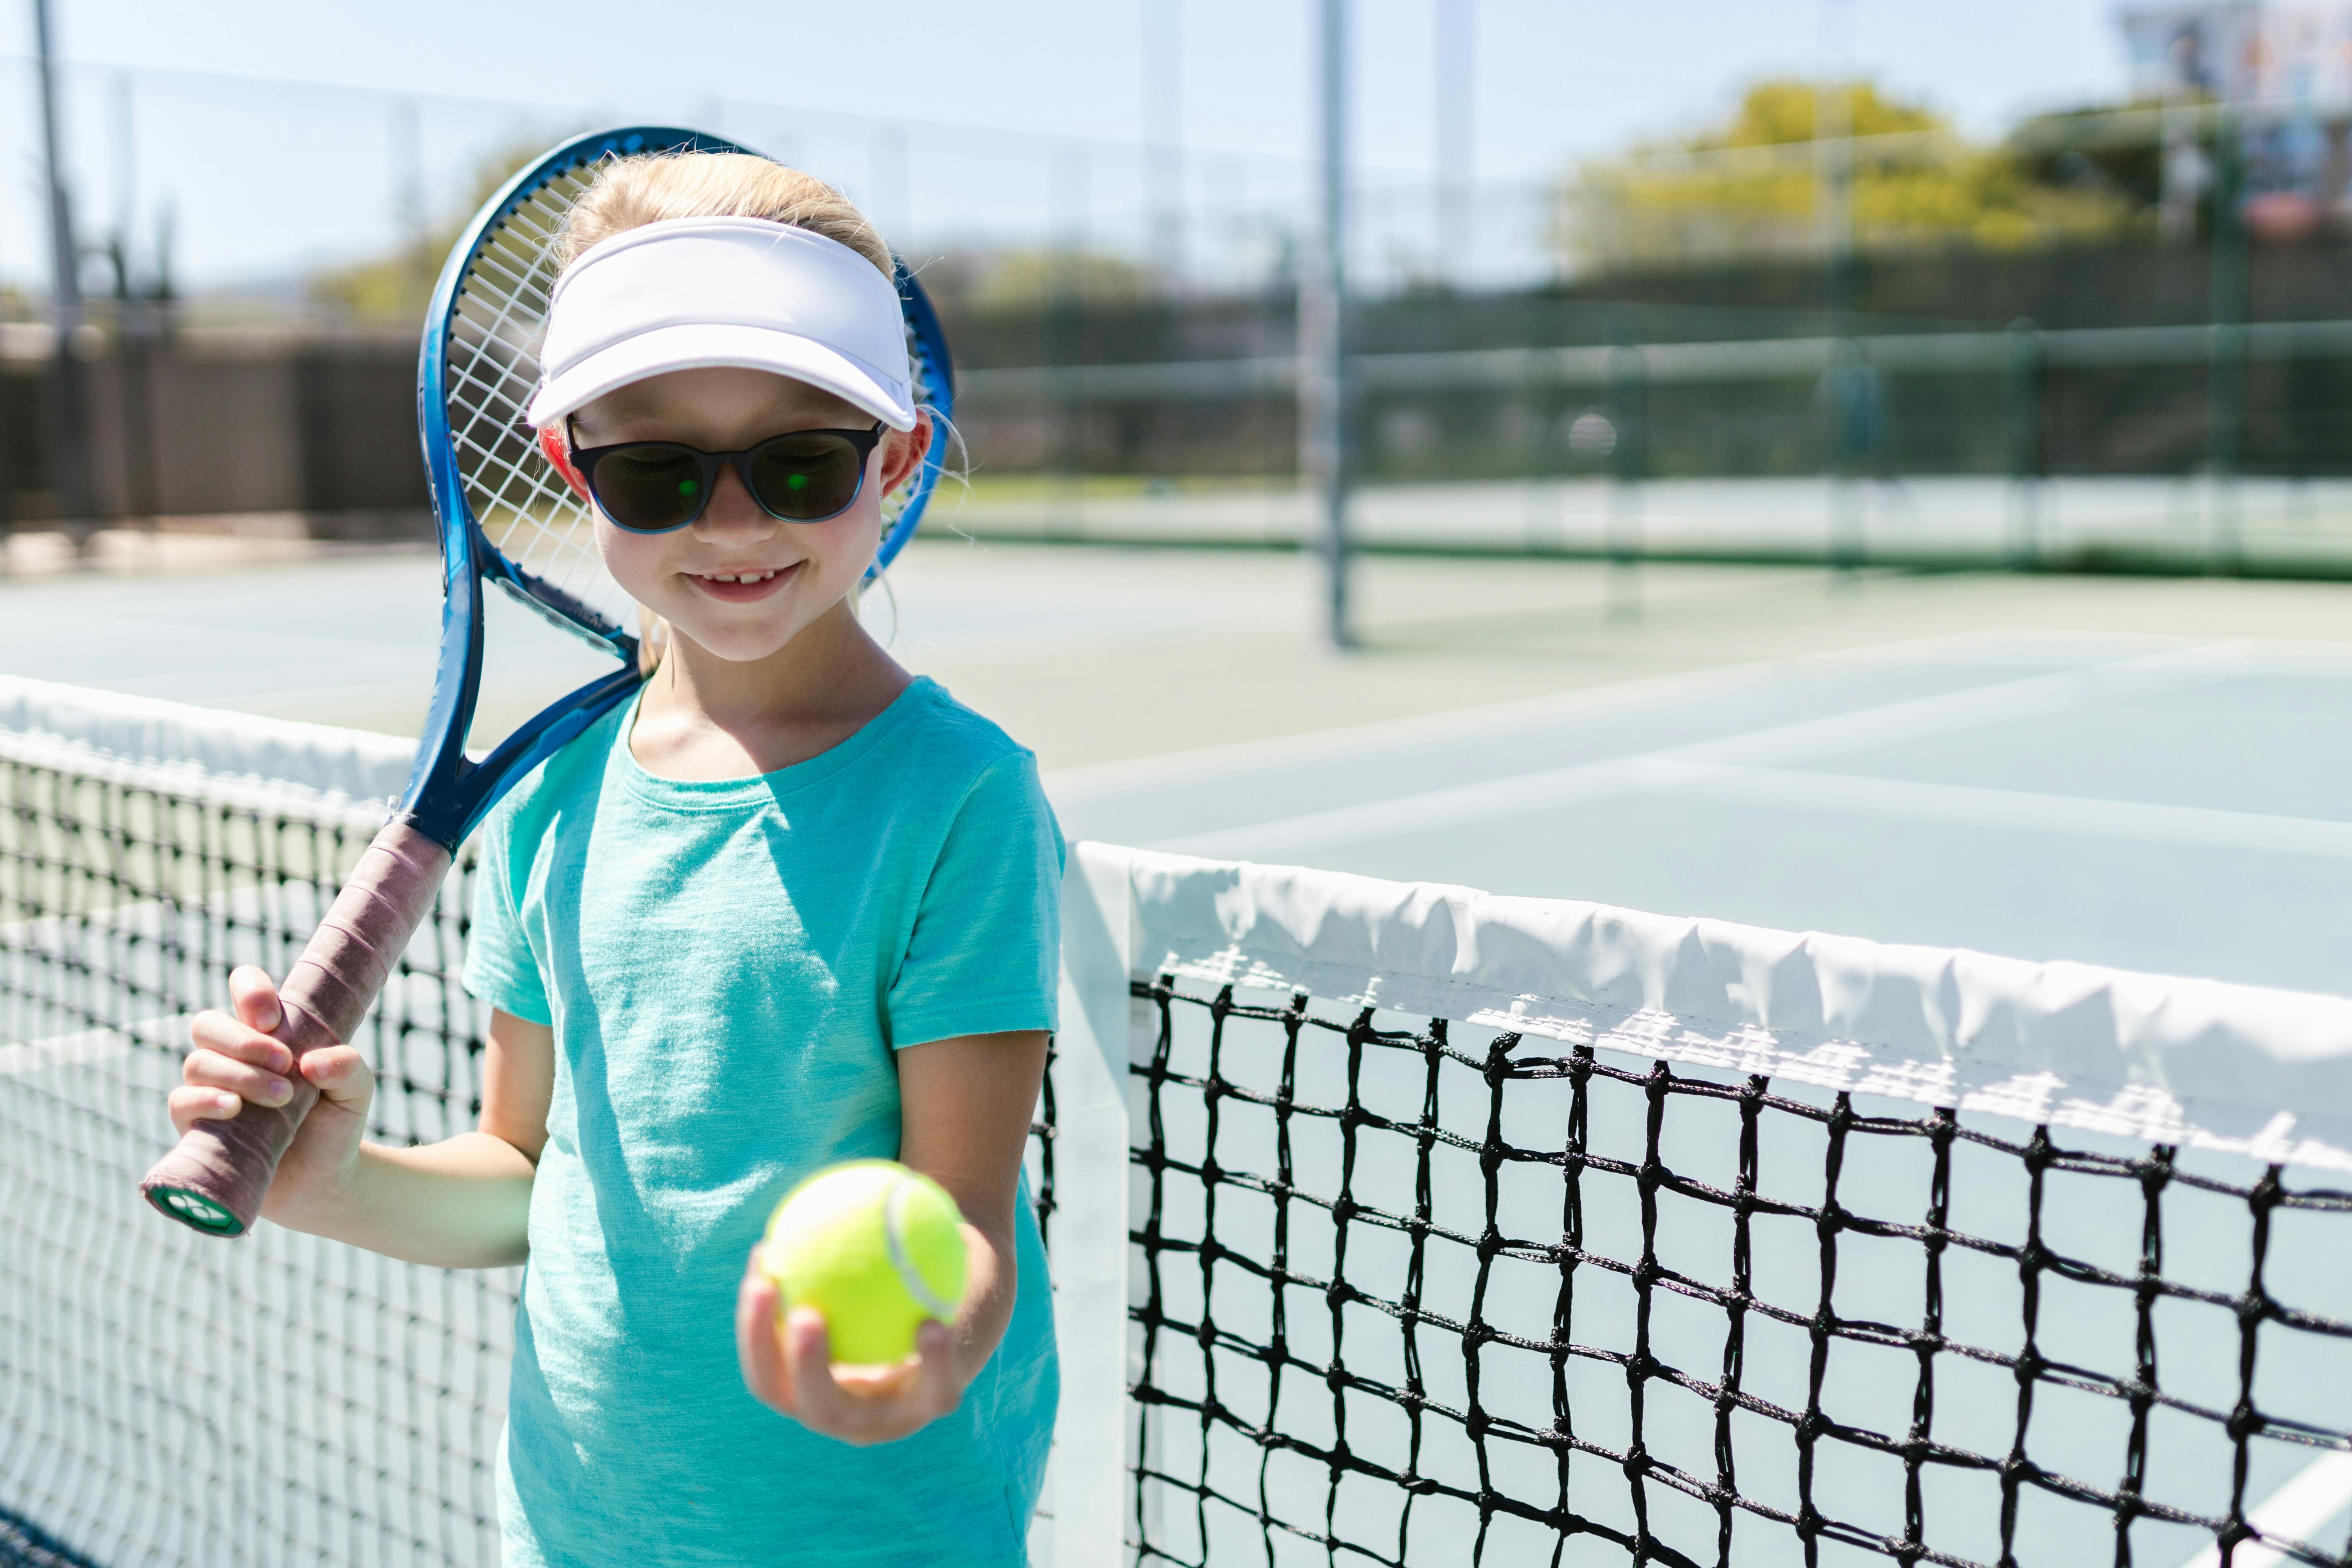 Girl Wearing Sunglasses while Holding a Tennis Racket and Tennis Ball ·  Free Stock Photo